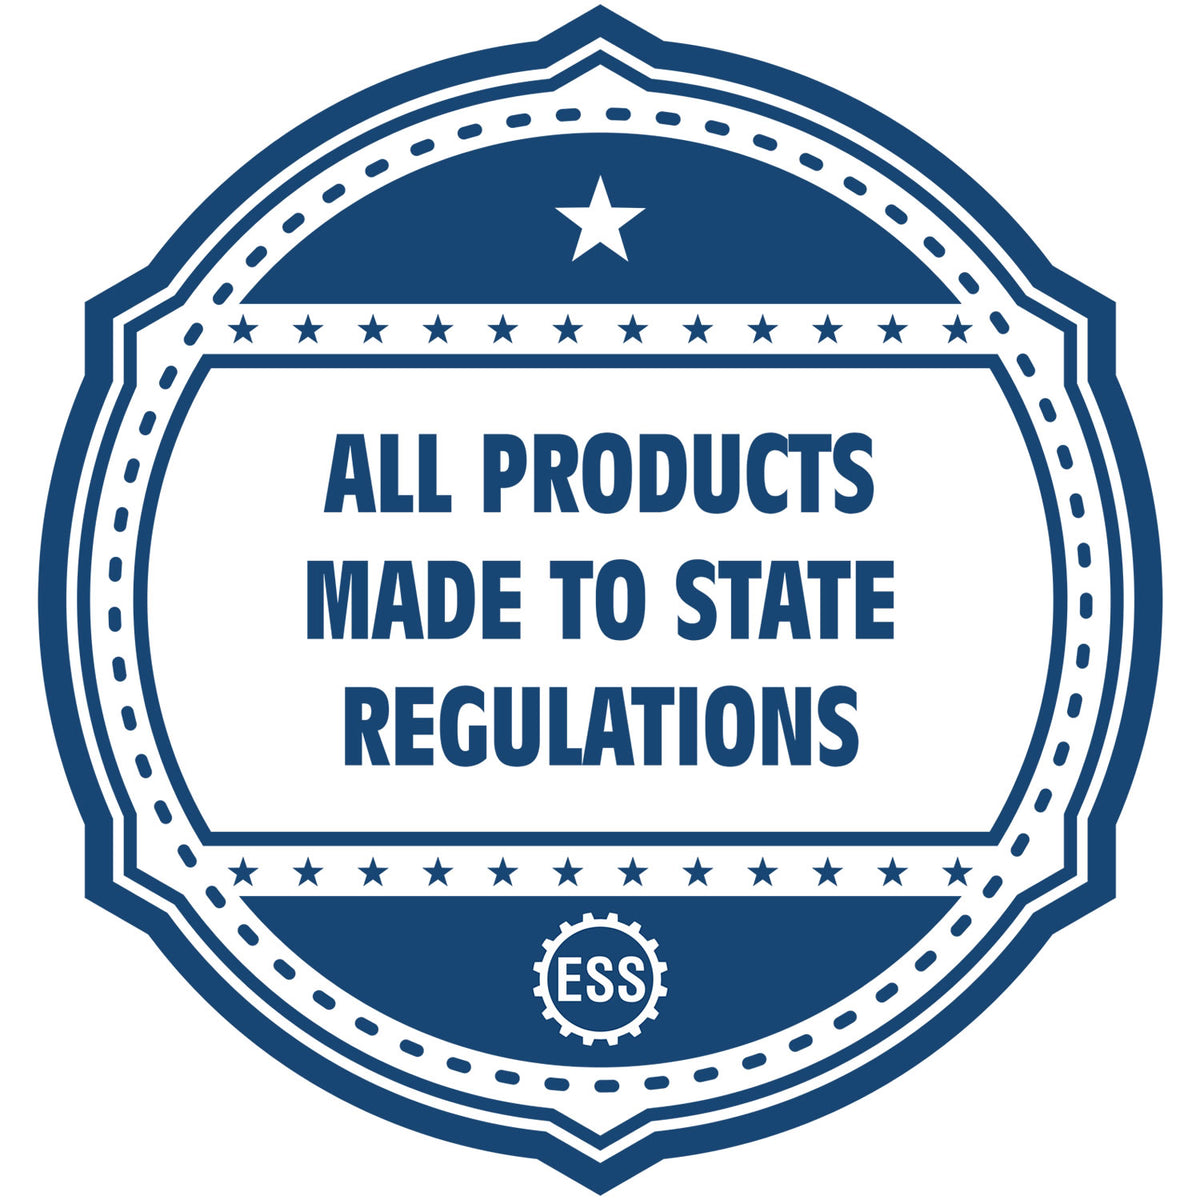 An icon or badge element for the State of Tennessee Long Reach Architectural Embossing Seal showing that this product is made in compliance with state regulations.